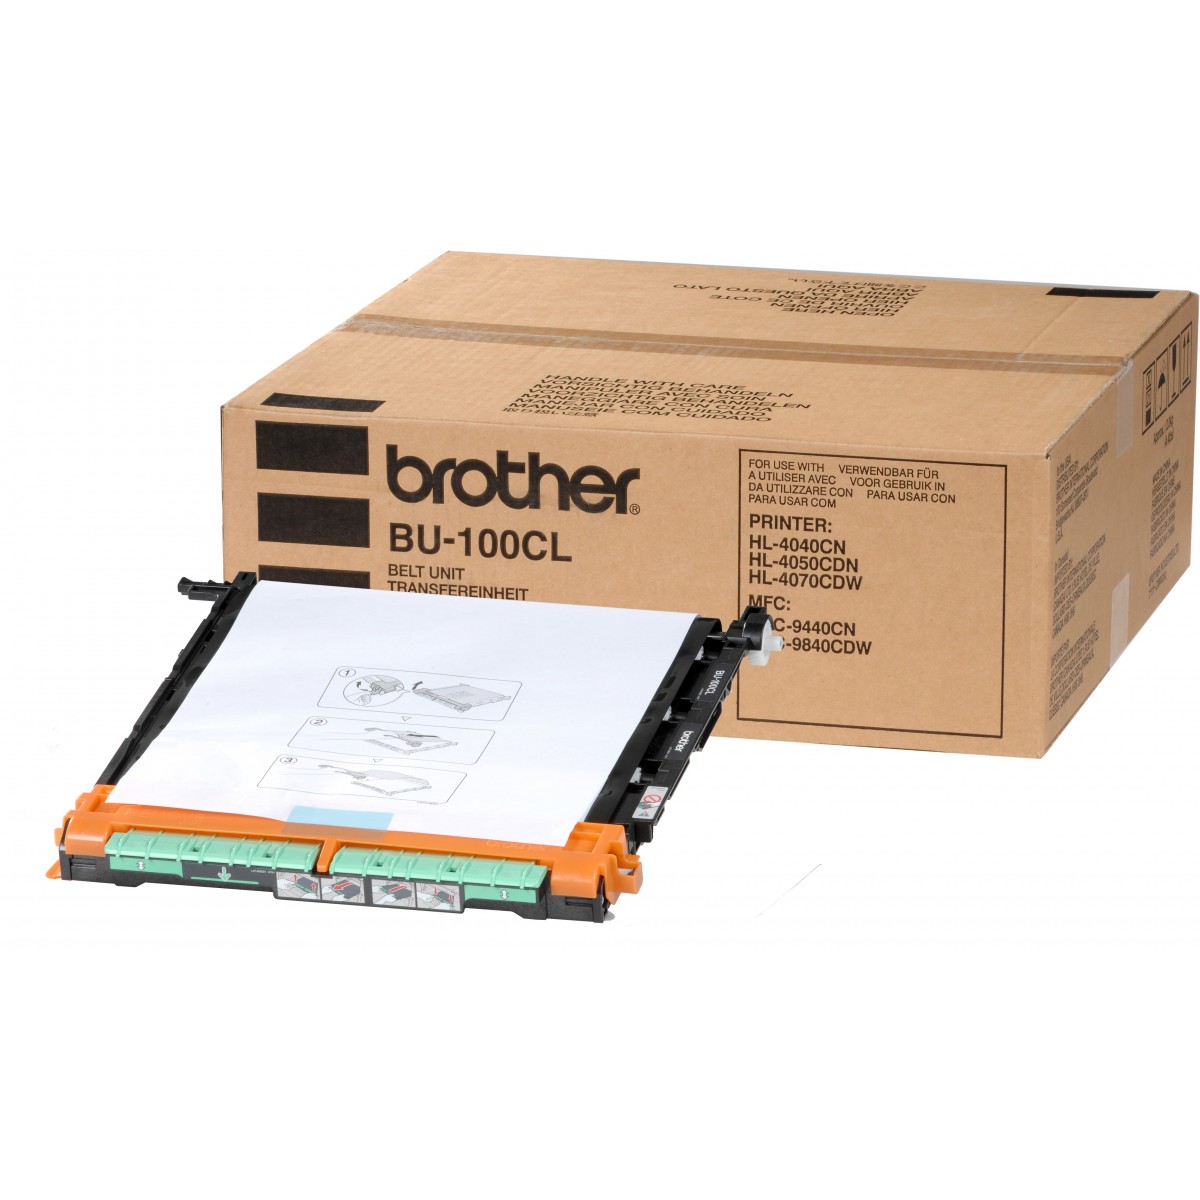 Brother BU-100CL - 50000 pages - Black - 1 pc(s)